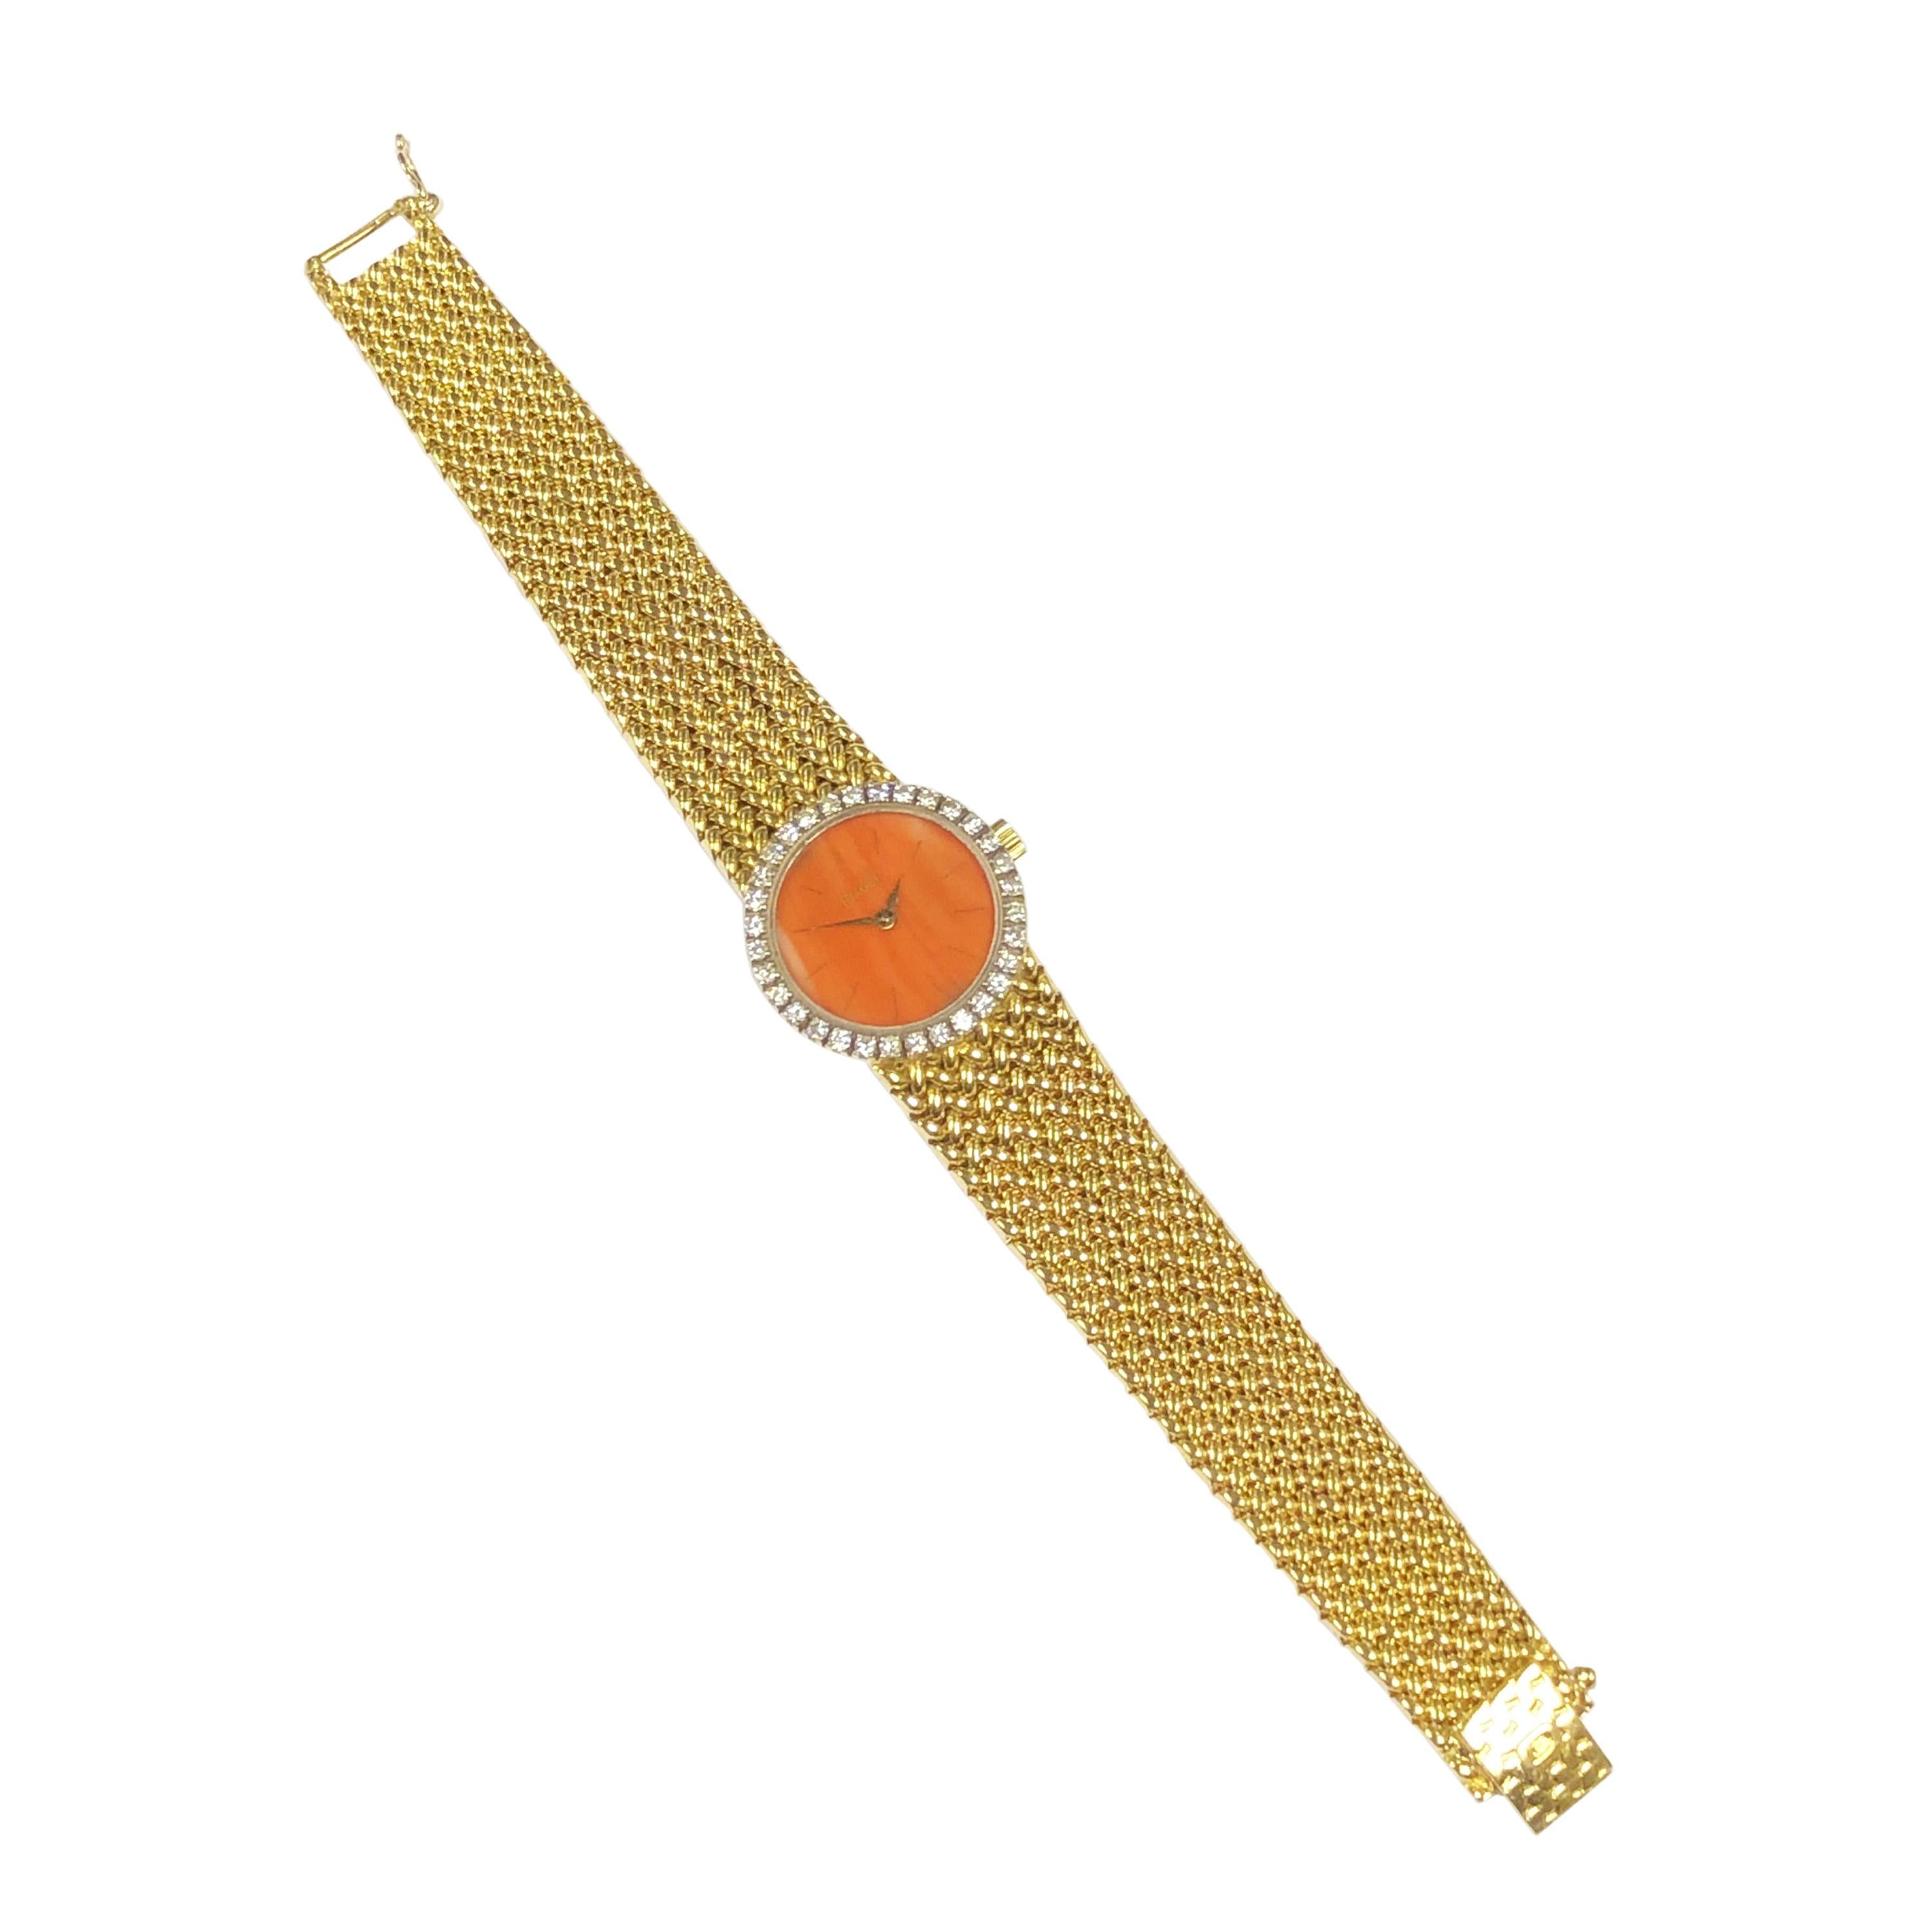 Circa 1980 Piaget Ladies Wrist Watch, 22 MM 18K Yellow Gold case, Piaget Factory set Bezel of Round Brilliant cut Diamonds totaling 1 Carat. Coral Dial, 17 Jewel mechanical, manual wind movement. 5/8 inch wide Piaget signed mesh link bracelet. Total